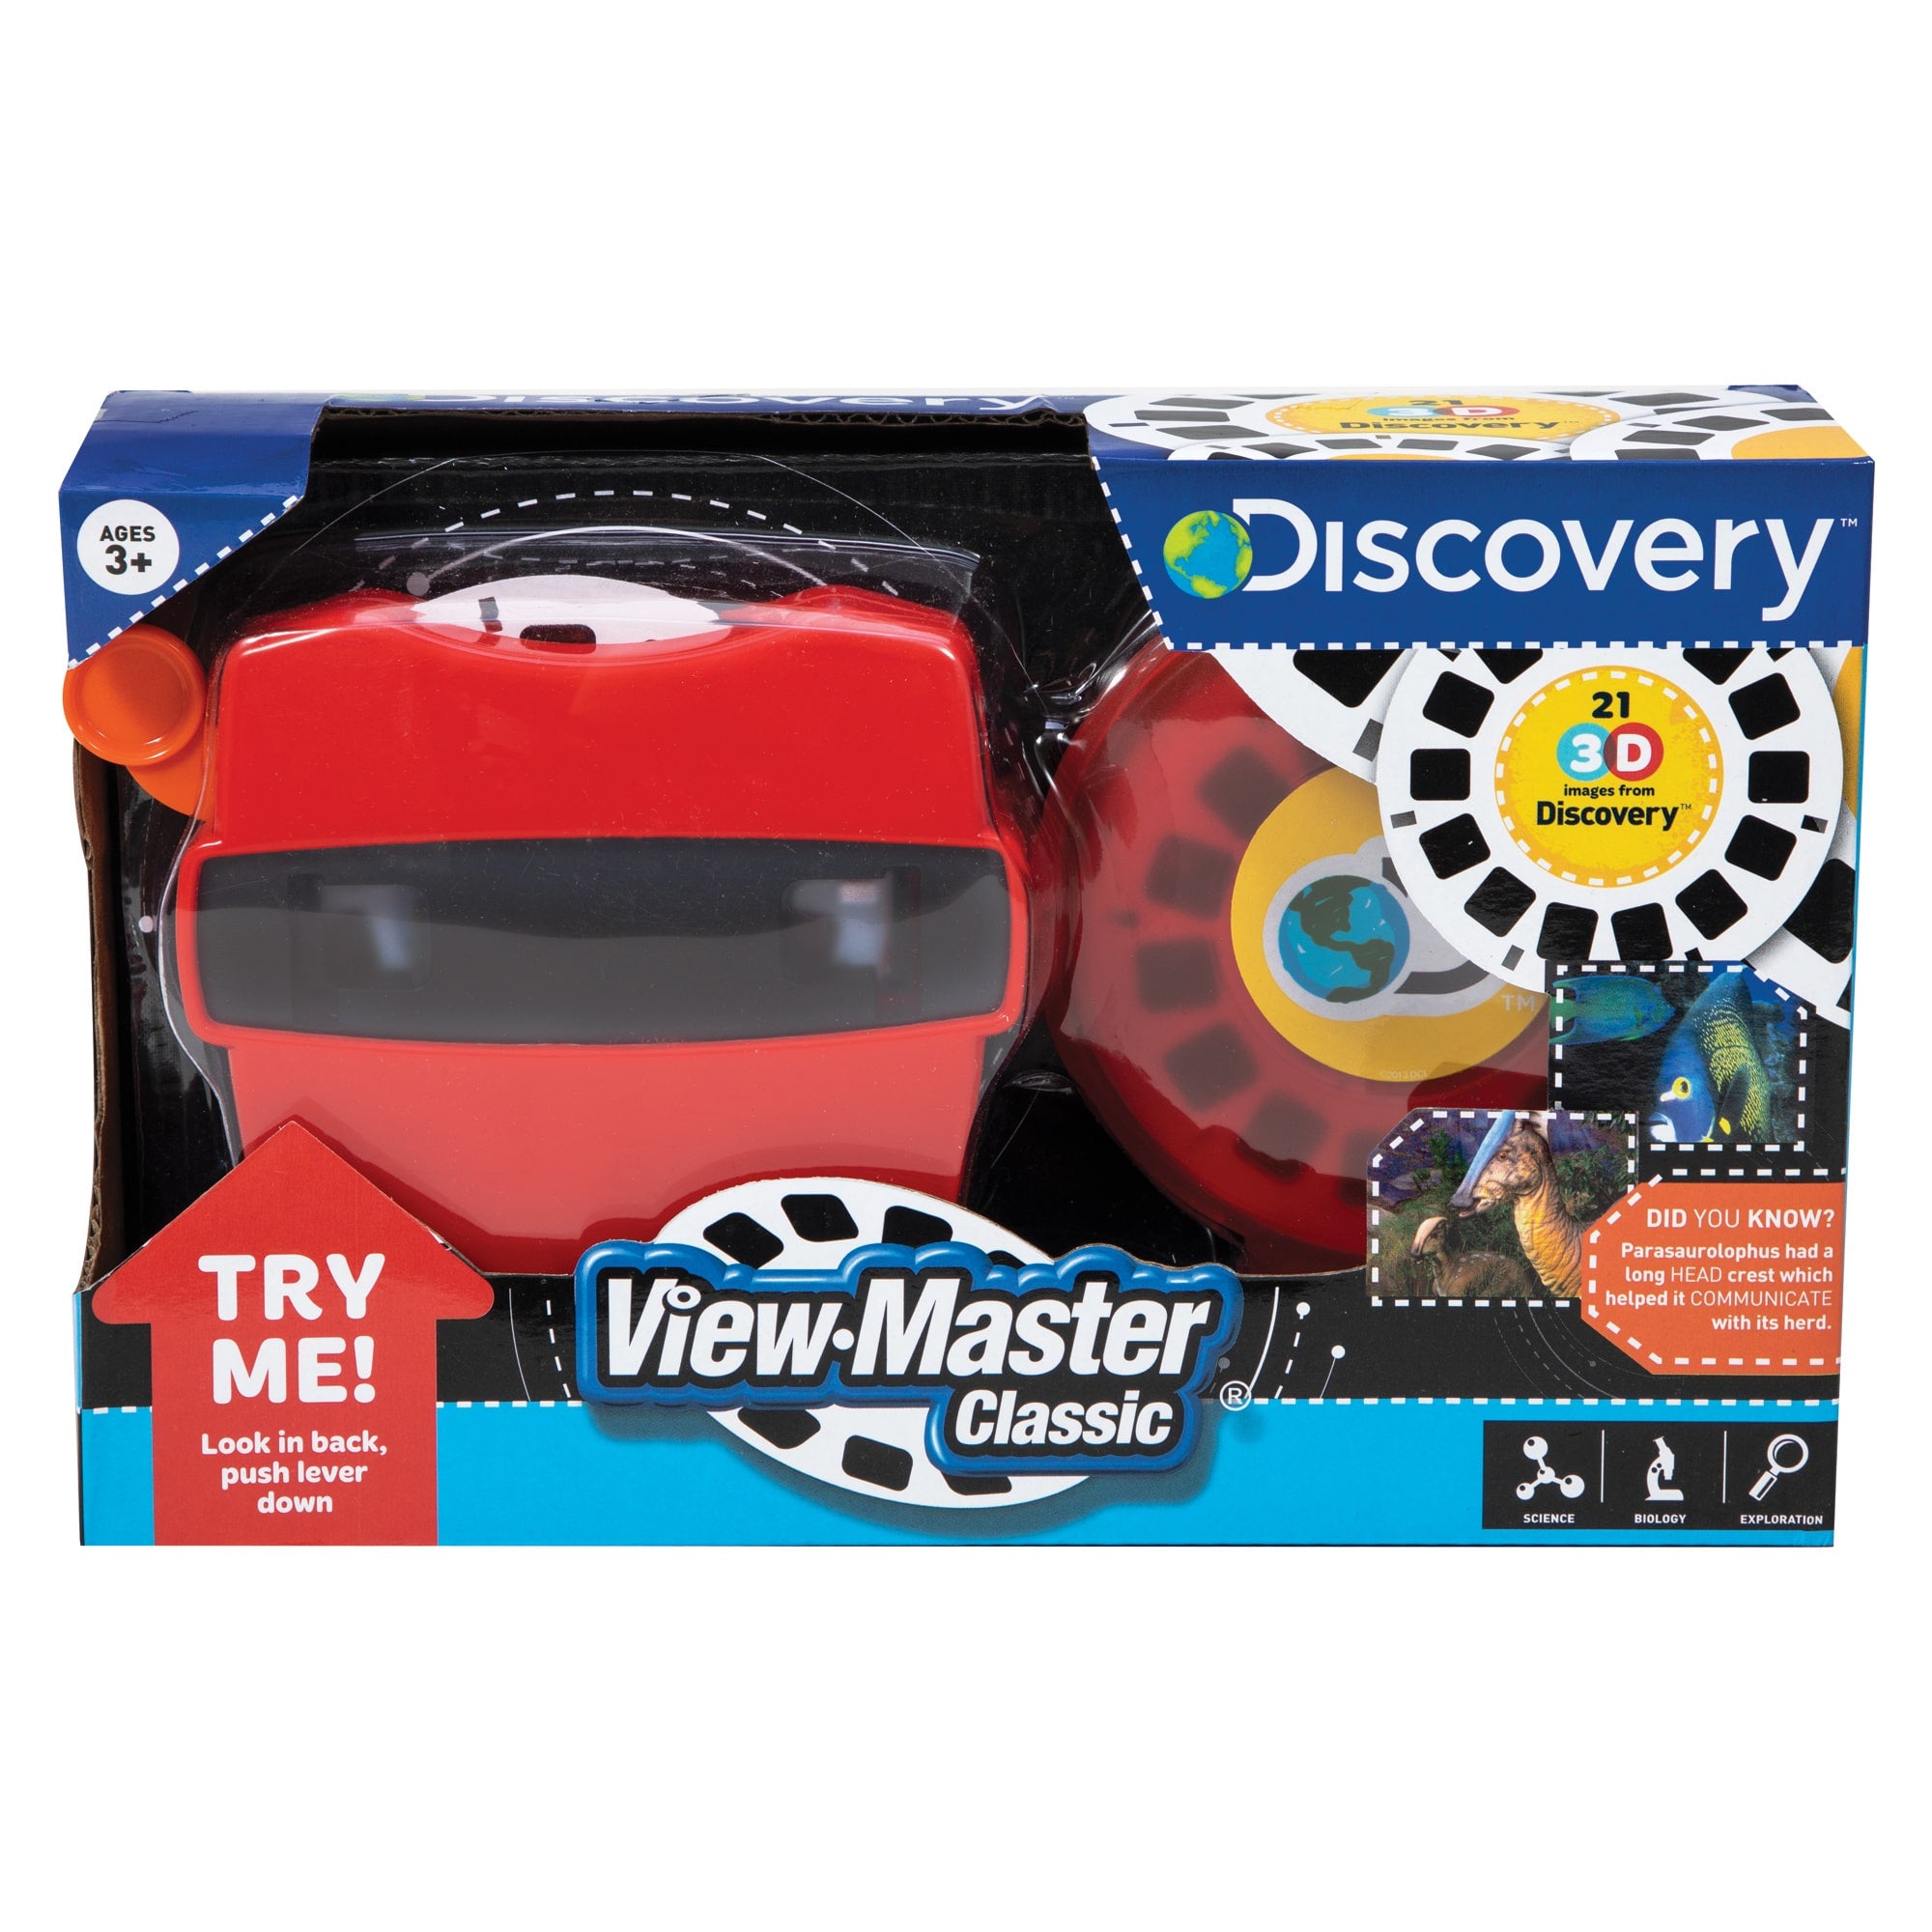 View Master Classic    